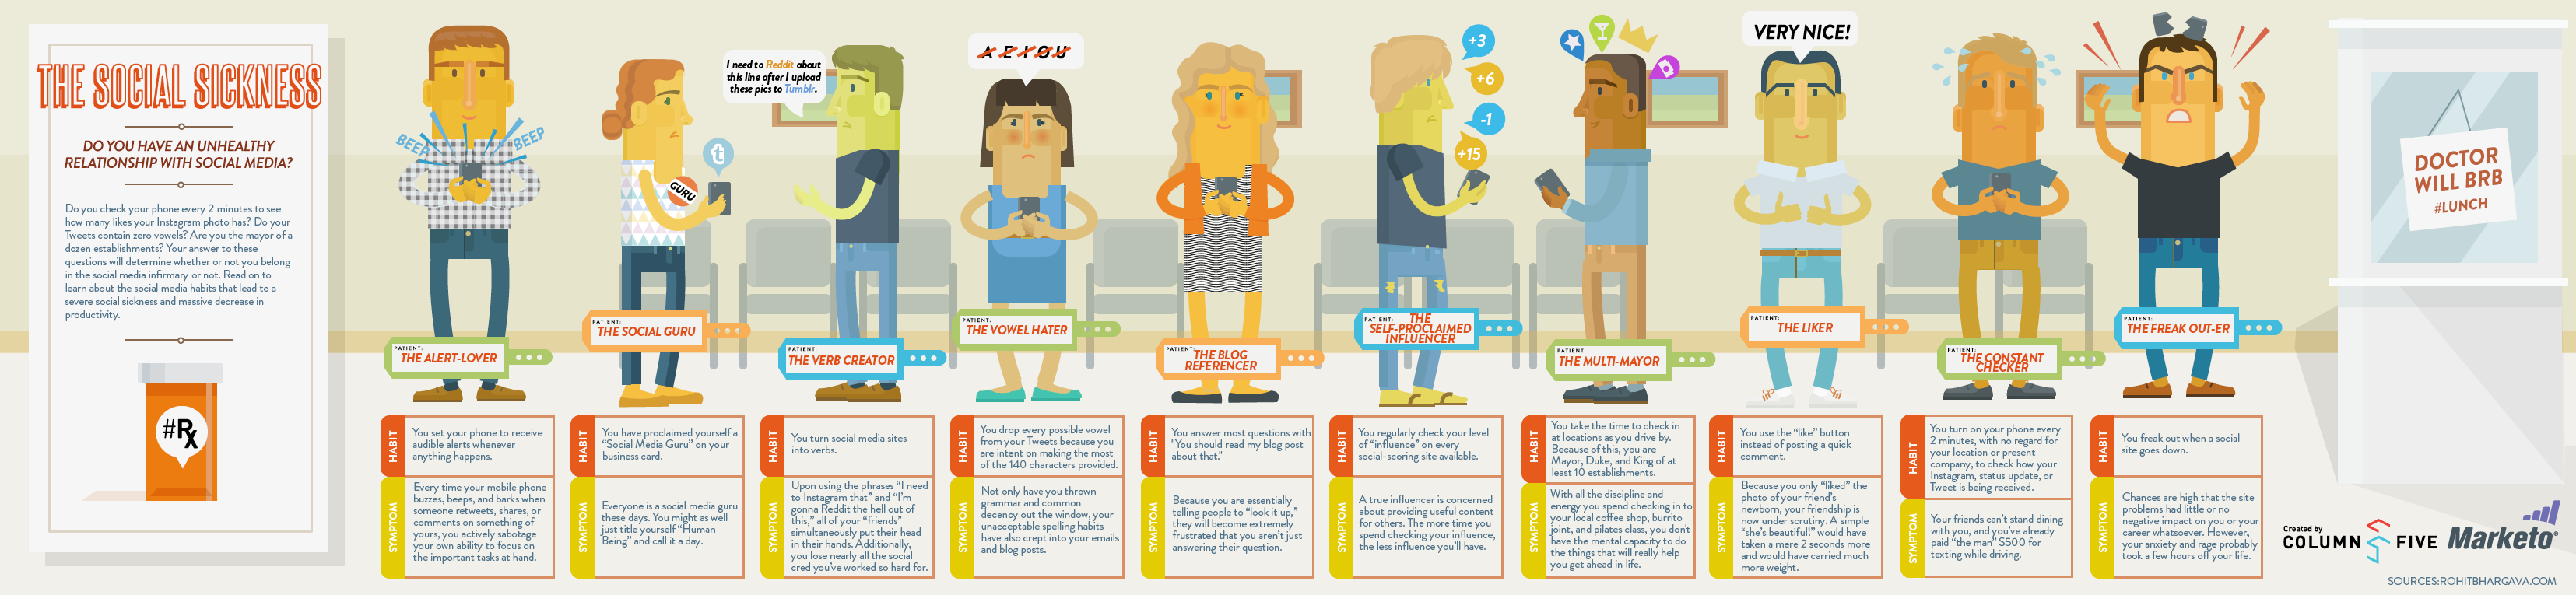 Social Media Addiction & Personality Types [Infographic]